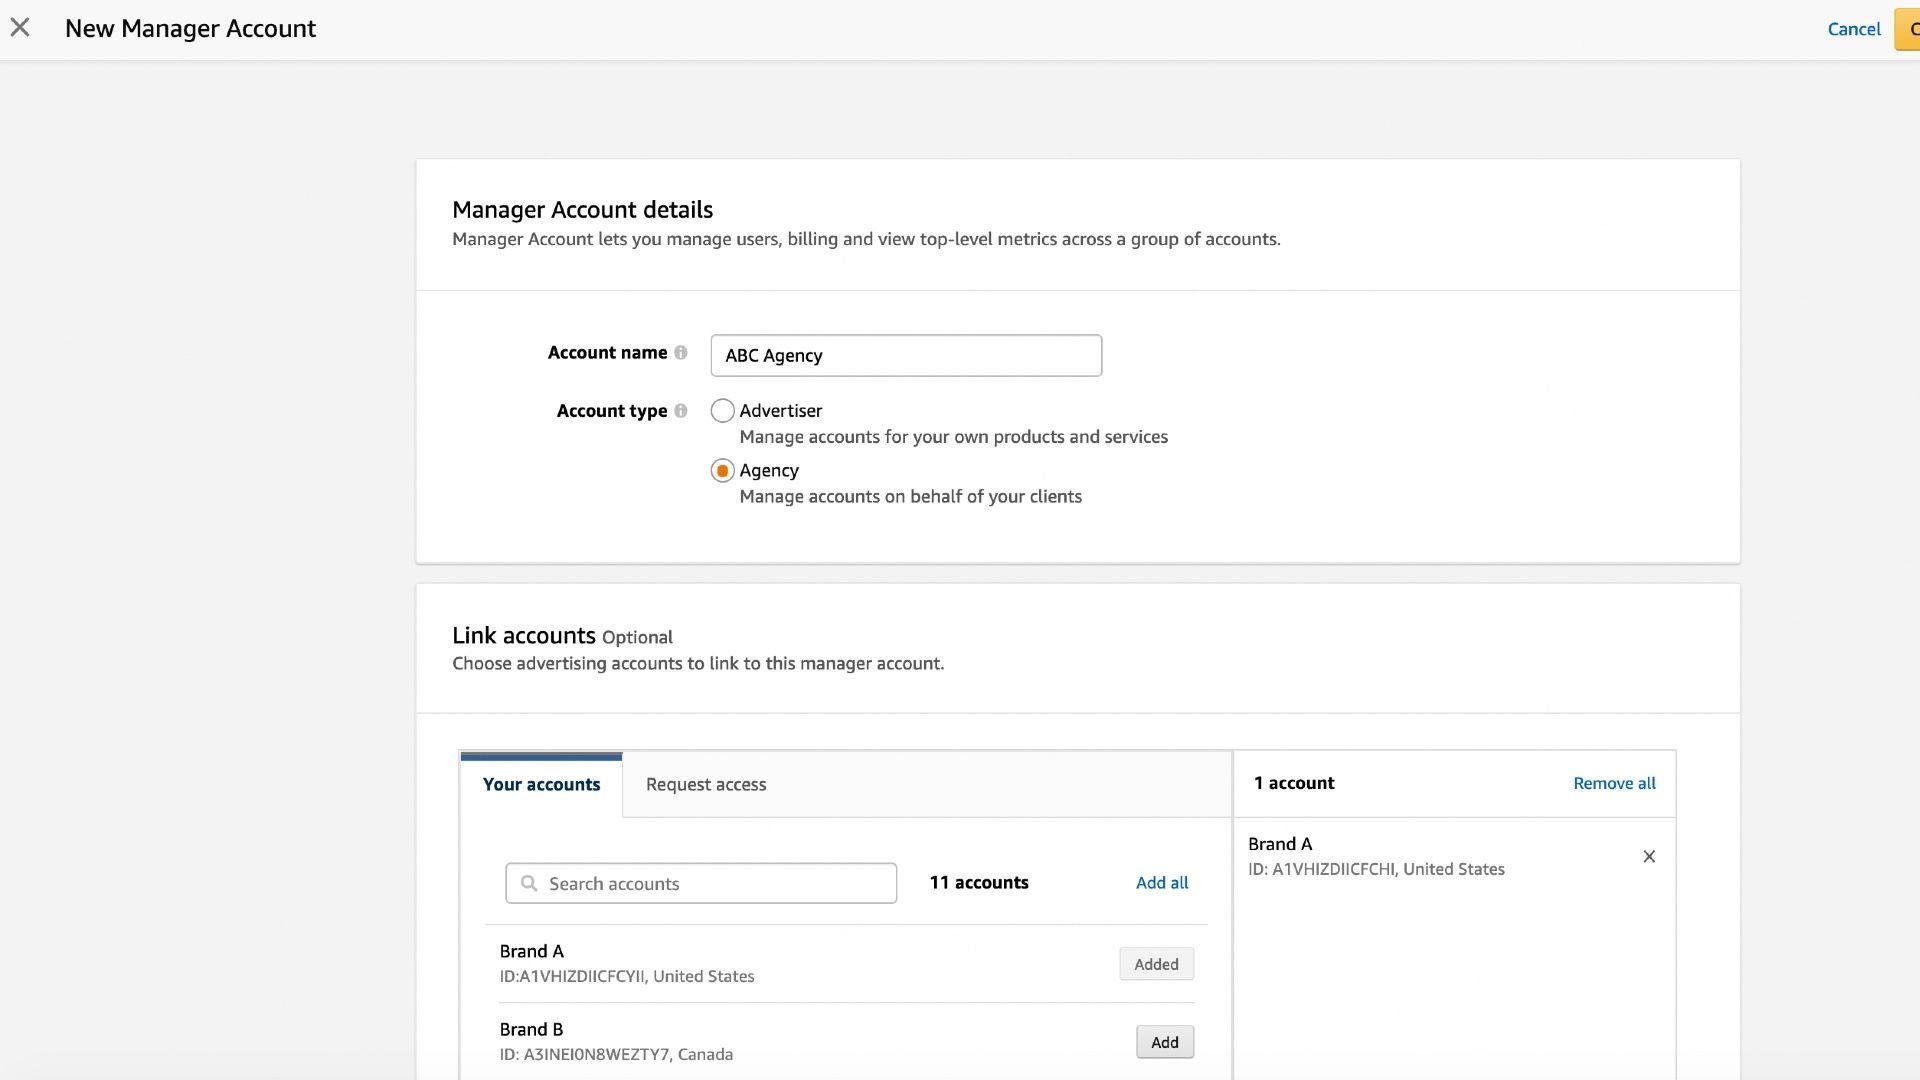 Amazon rolls out Manager Account enabling advertisers to share accounts